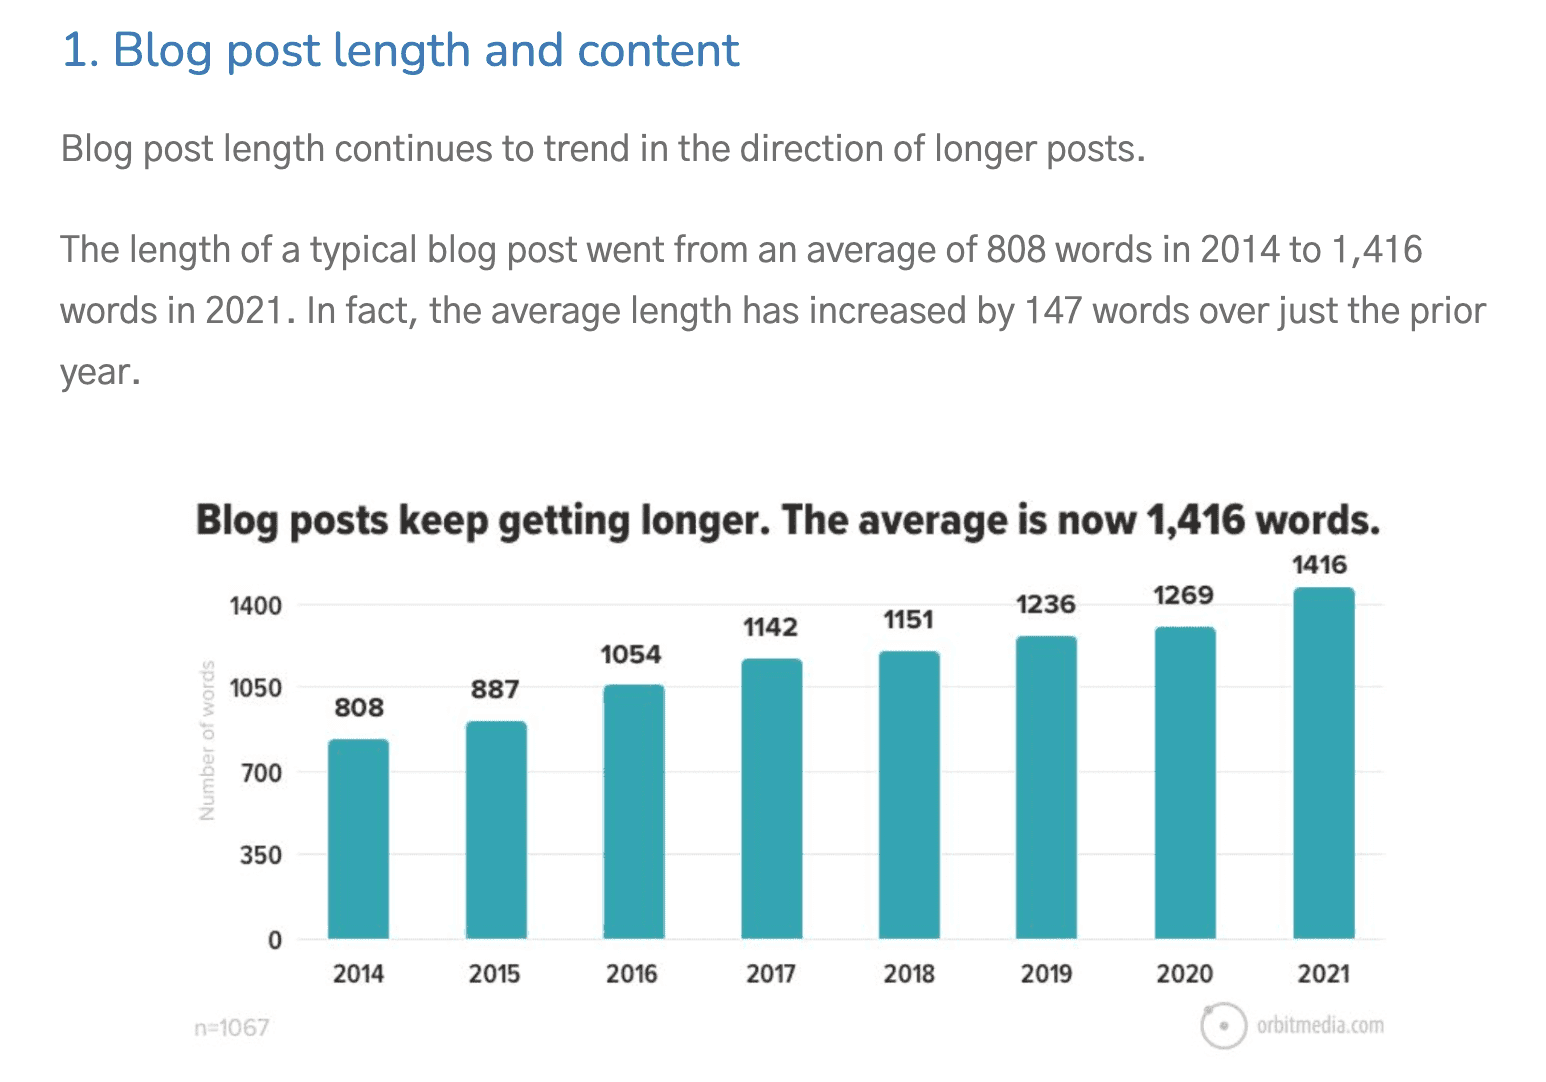 Average blog post length throughout recent years